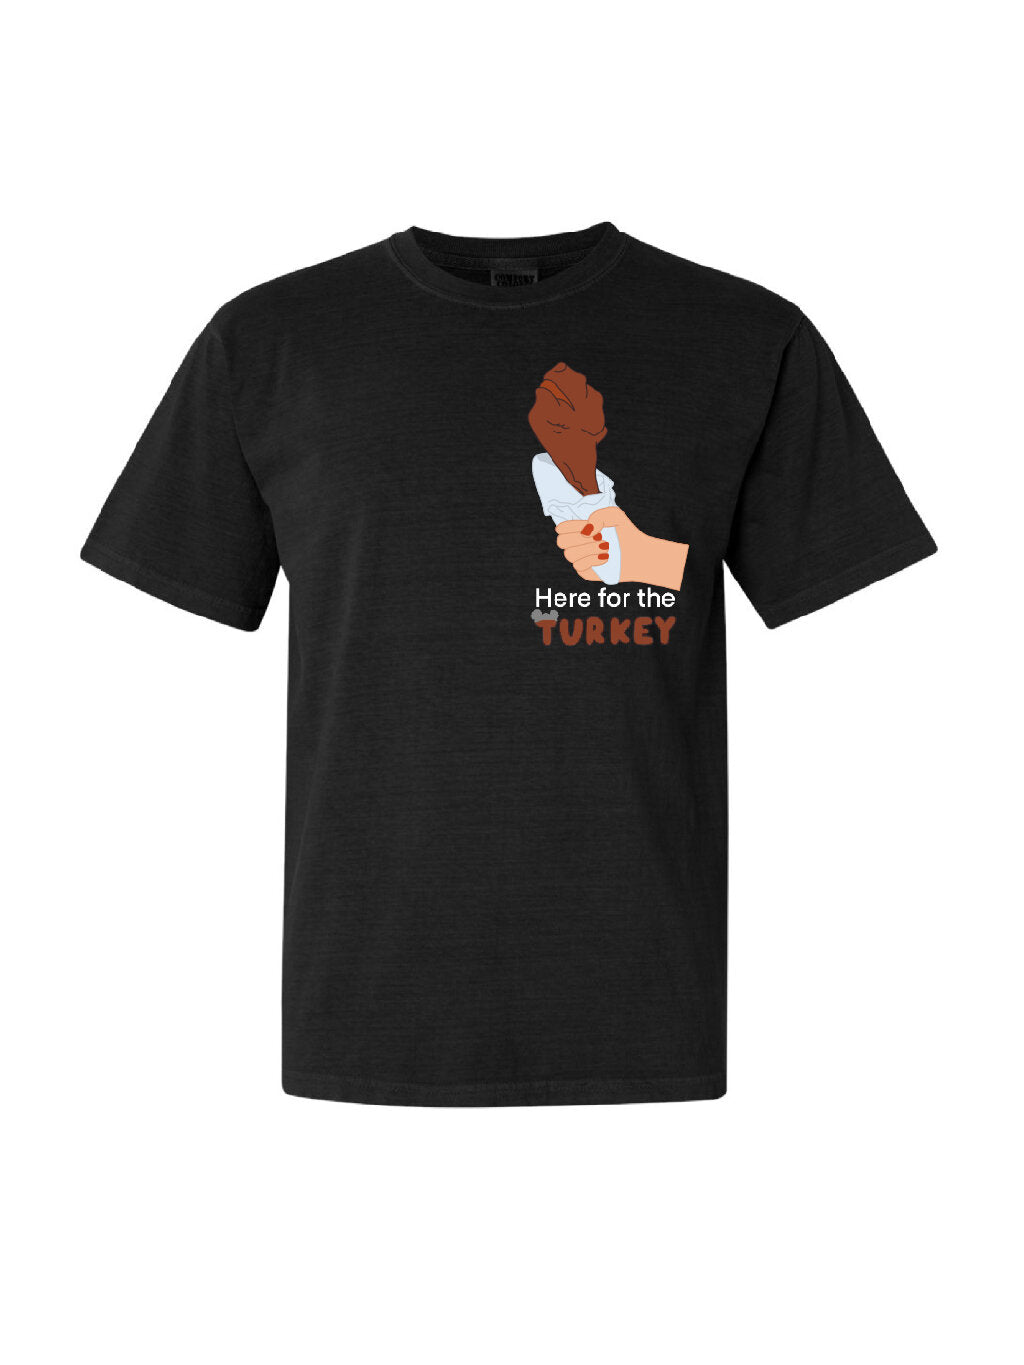 Here for the Turkey Tee